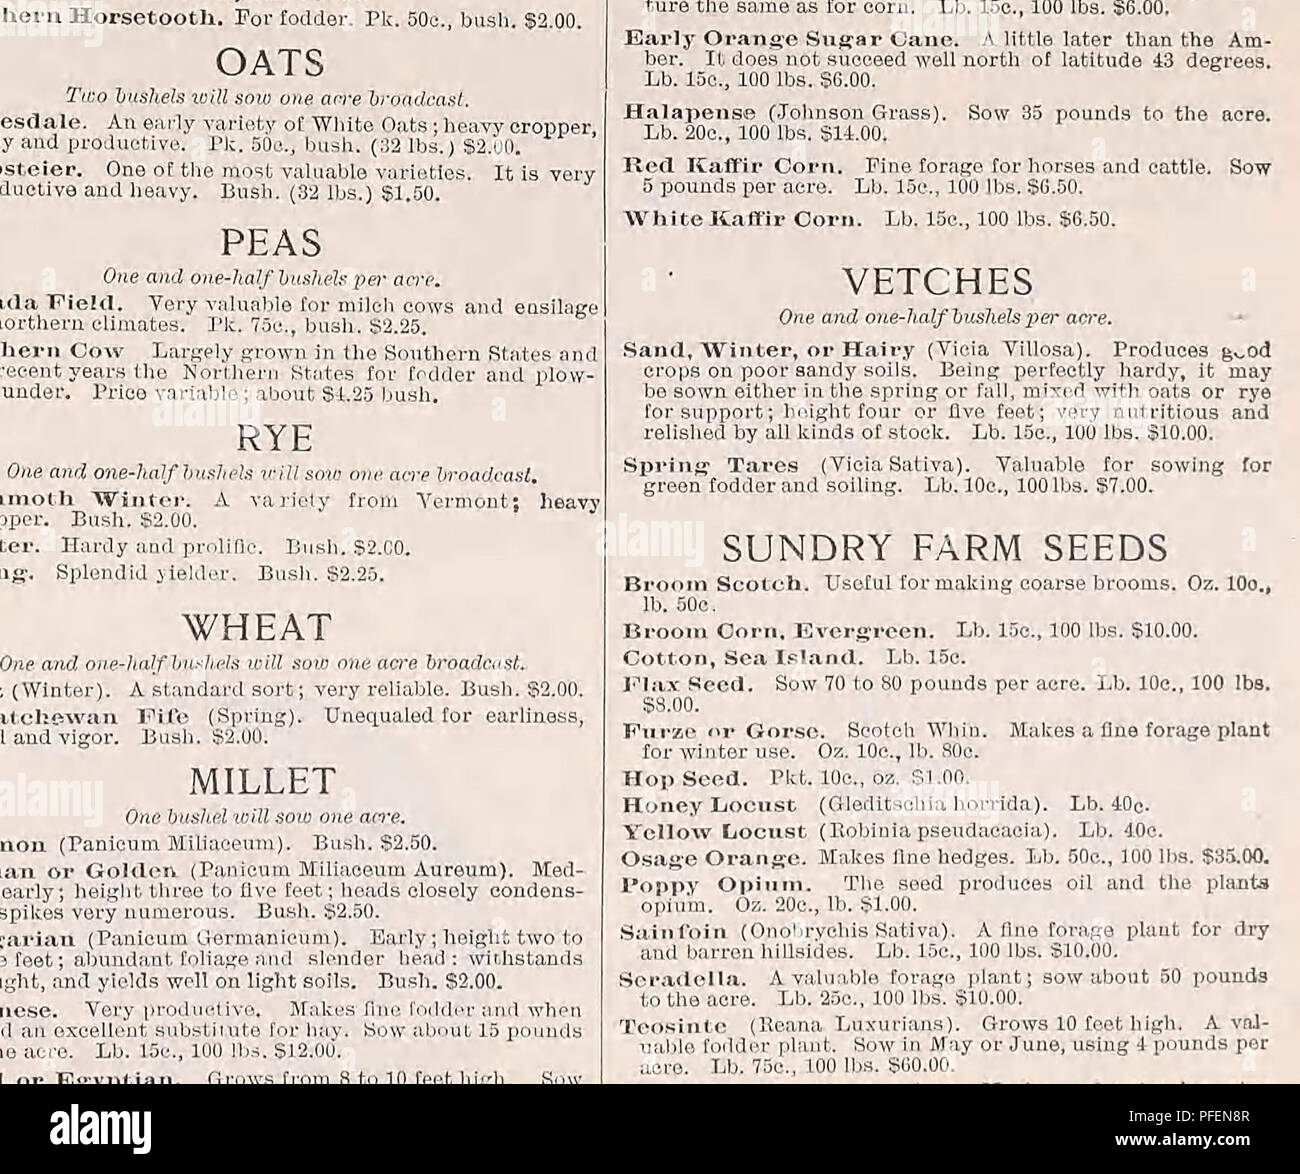 . Descriptive catalogue of vegetable, flower, and farm seeds. Nurseries (Horticulture); Nursery stock; Seeds; Bulbs (Plants); Gardening; Equipment and supplies; Bedding plants; Weeber &amp; Don. GENERAL LIST OF KEY TO ABBREVIATIONS USED THROUGHOUT THE FLOWER SEED PORTION OF OUR CATALOGUE A:iiui:ls-I..'islinv Iml nno yew II. ]'. ilcsitrmk'S Ilnnly i'ereniiiiils-LnsliiiK lliiec or aidy Allium!!, ijiMini! lun uim move years. II. II. r. •' Hull llfinly I'.-iv„m.-iL K, ,„.,-,. Full Directions for Sowing Flower Seeds Printed on Each Packet FLOWER SEEDS IN PACKETS FREE BY MAIL ABOBHA Vi ADONIS .Ksli Stock Photo